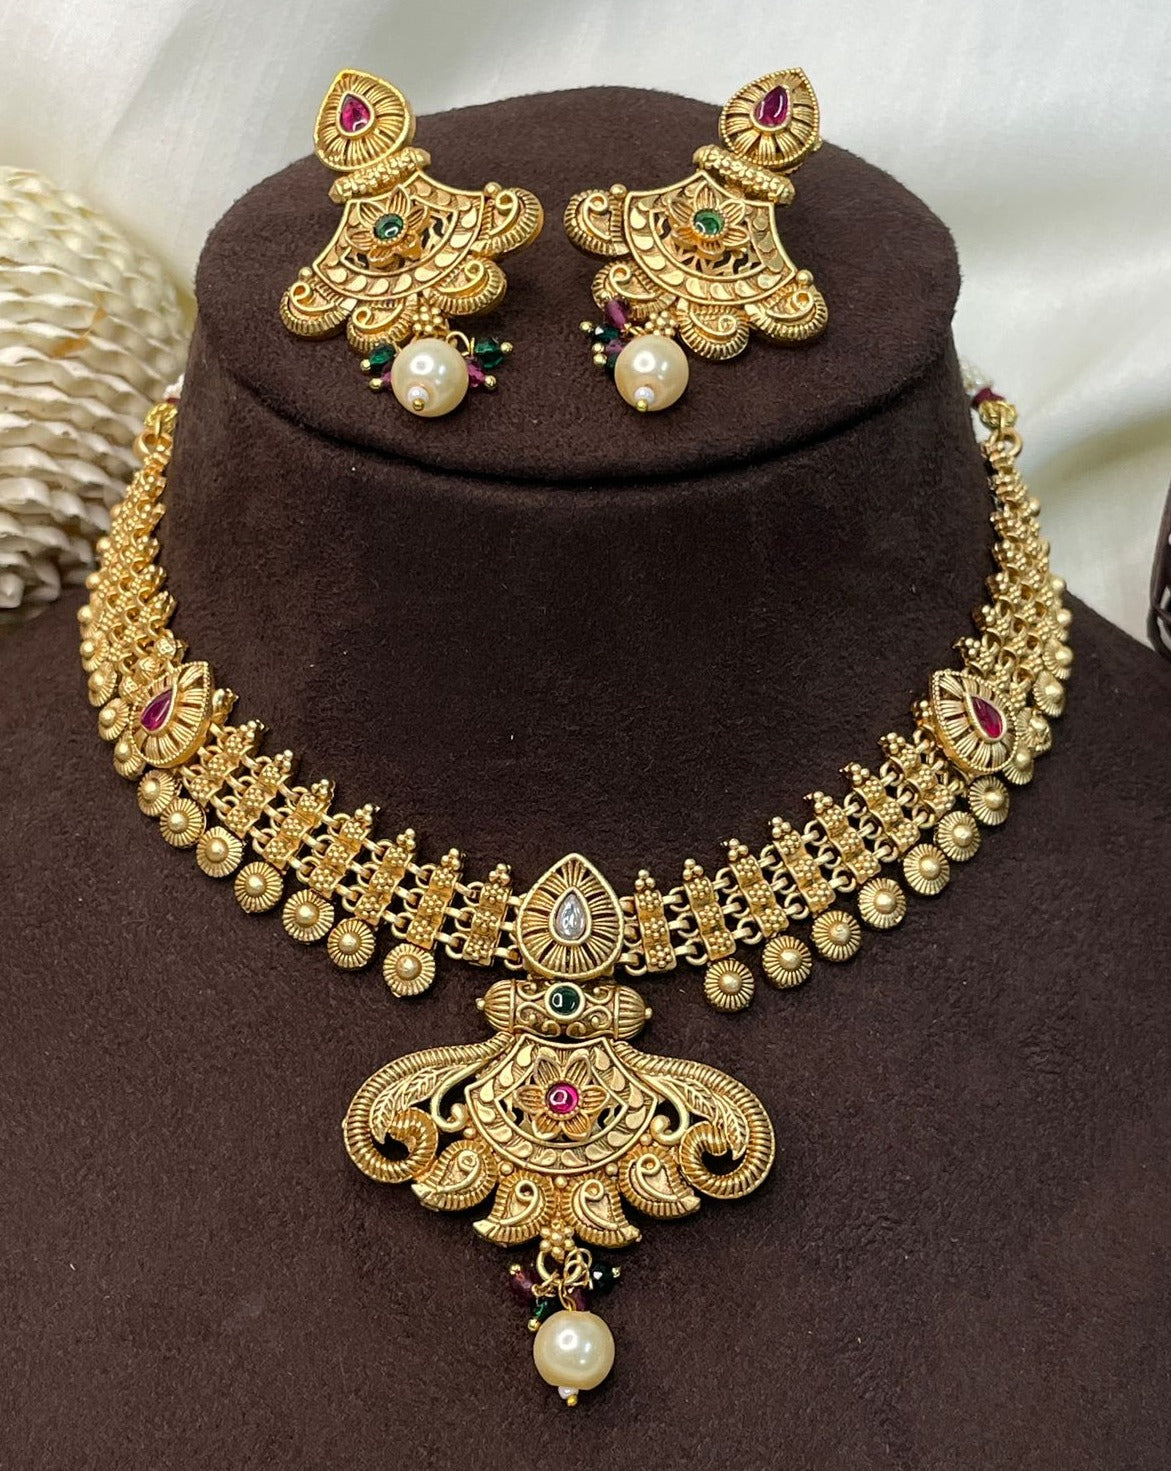 Classical Antique High Quality Necklace - Abdesignsjewellery